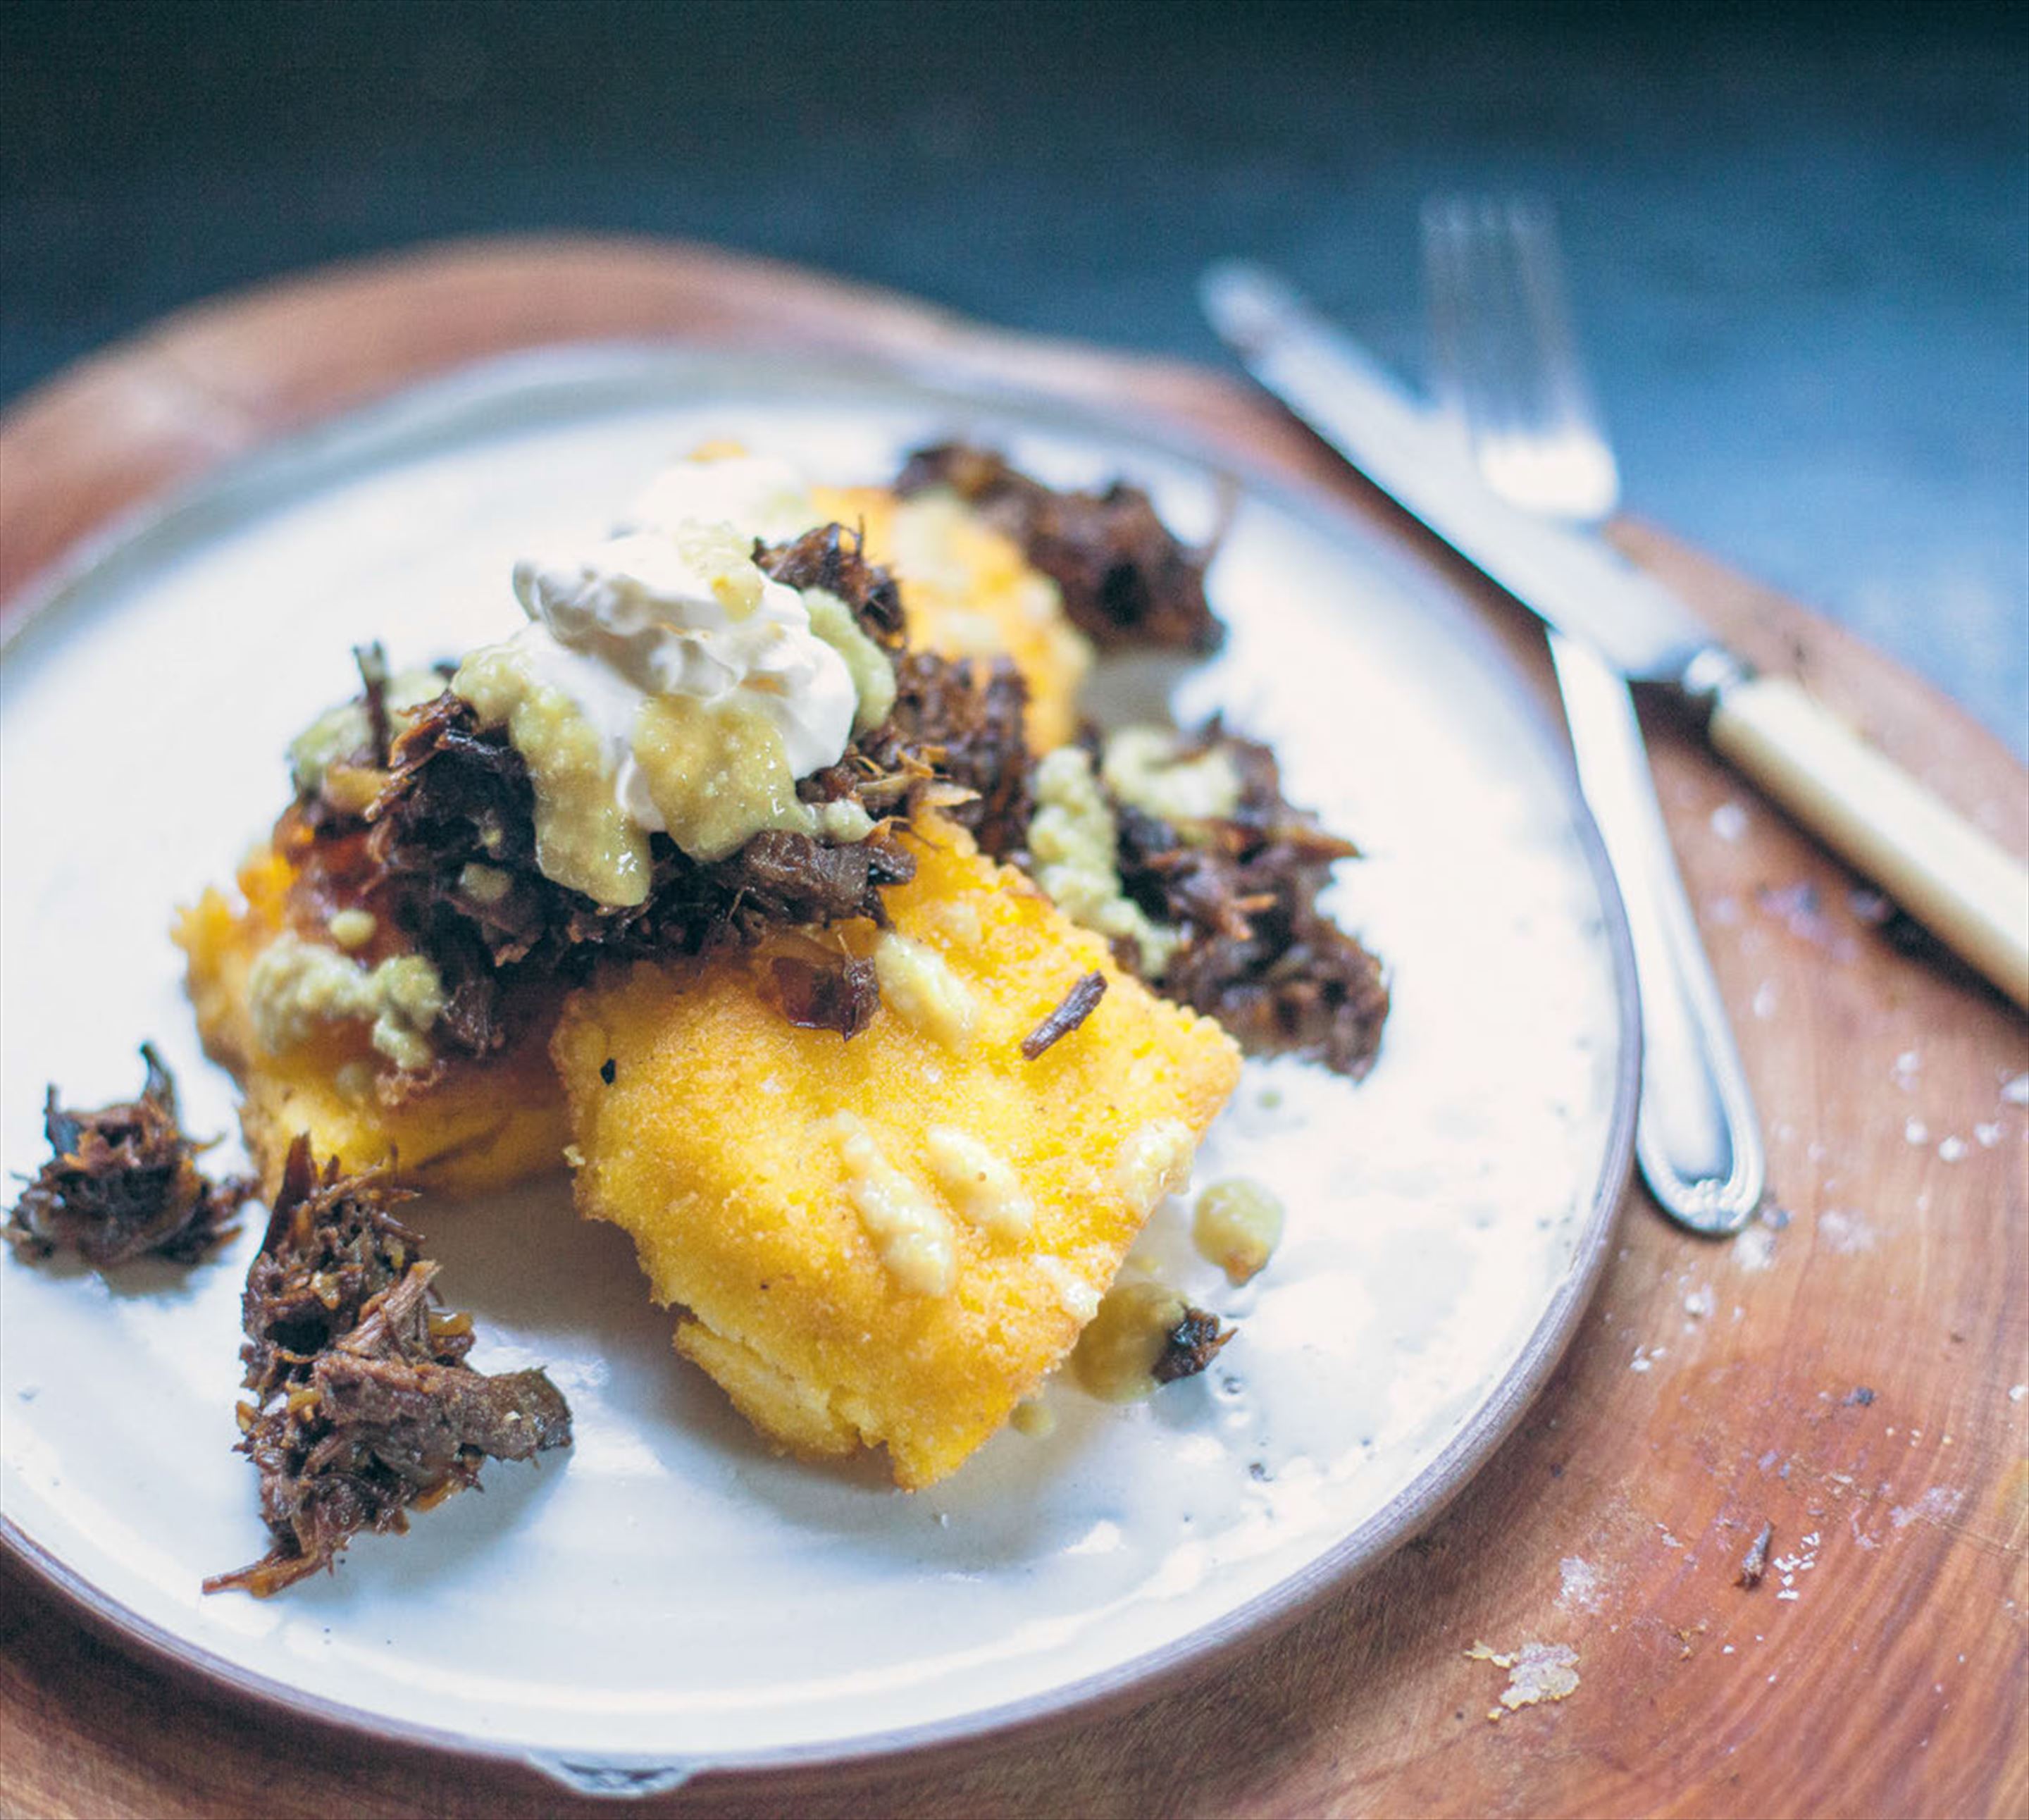 Sweet & hot braised hare with fried polenta